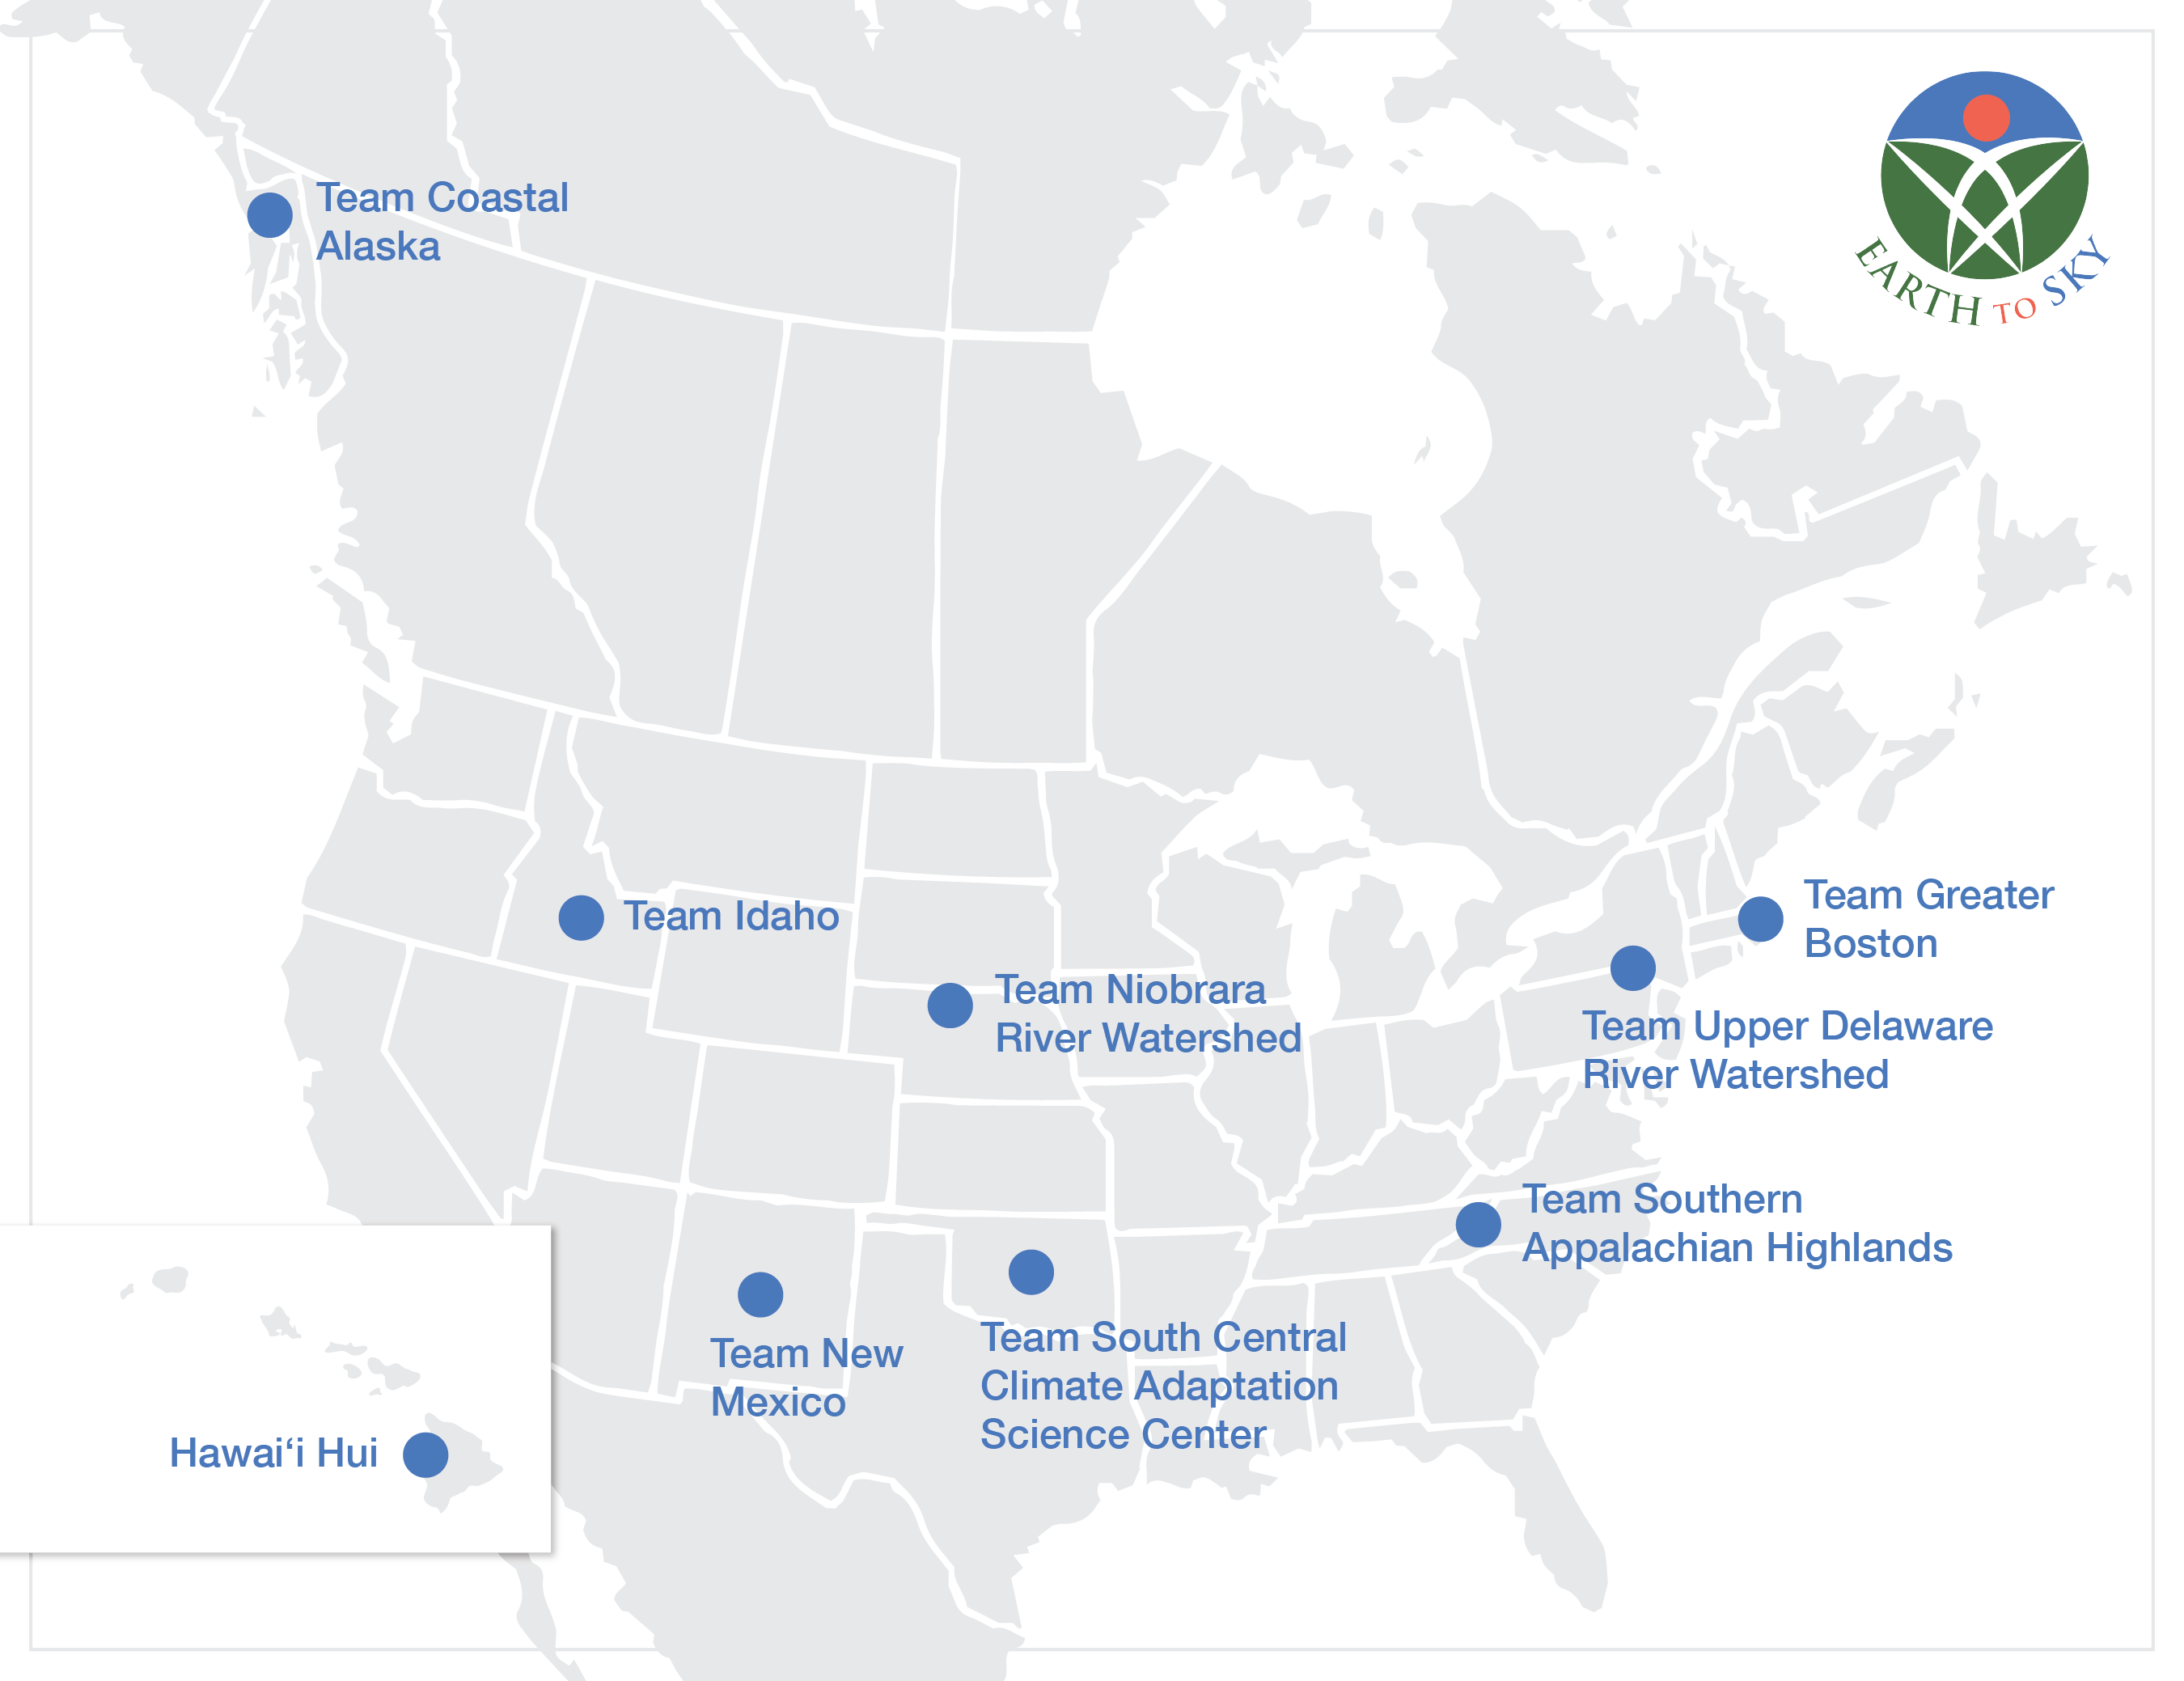 Map of North America showing the locations of the existing and new regional teams